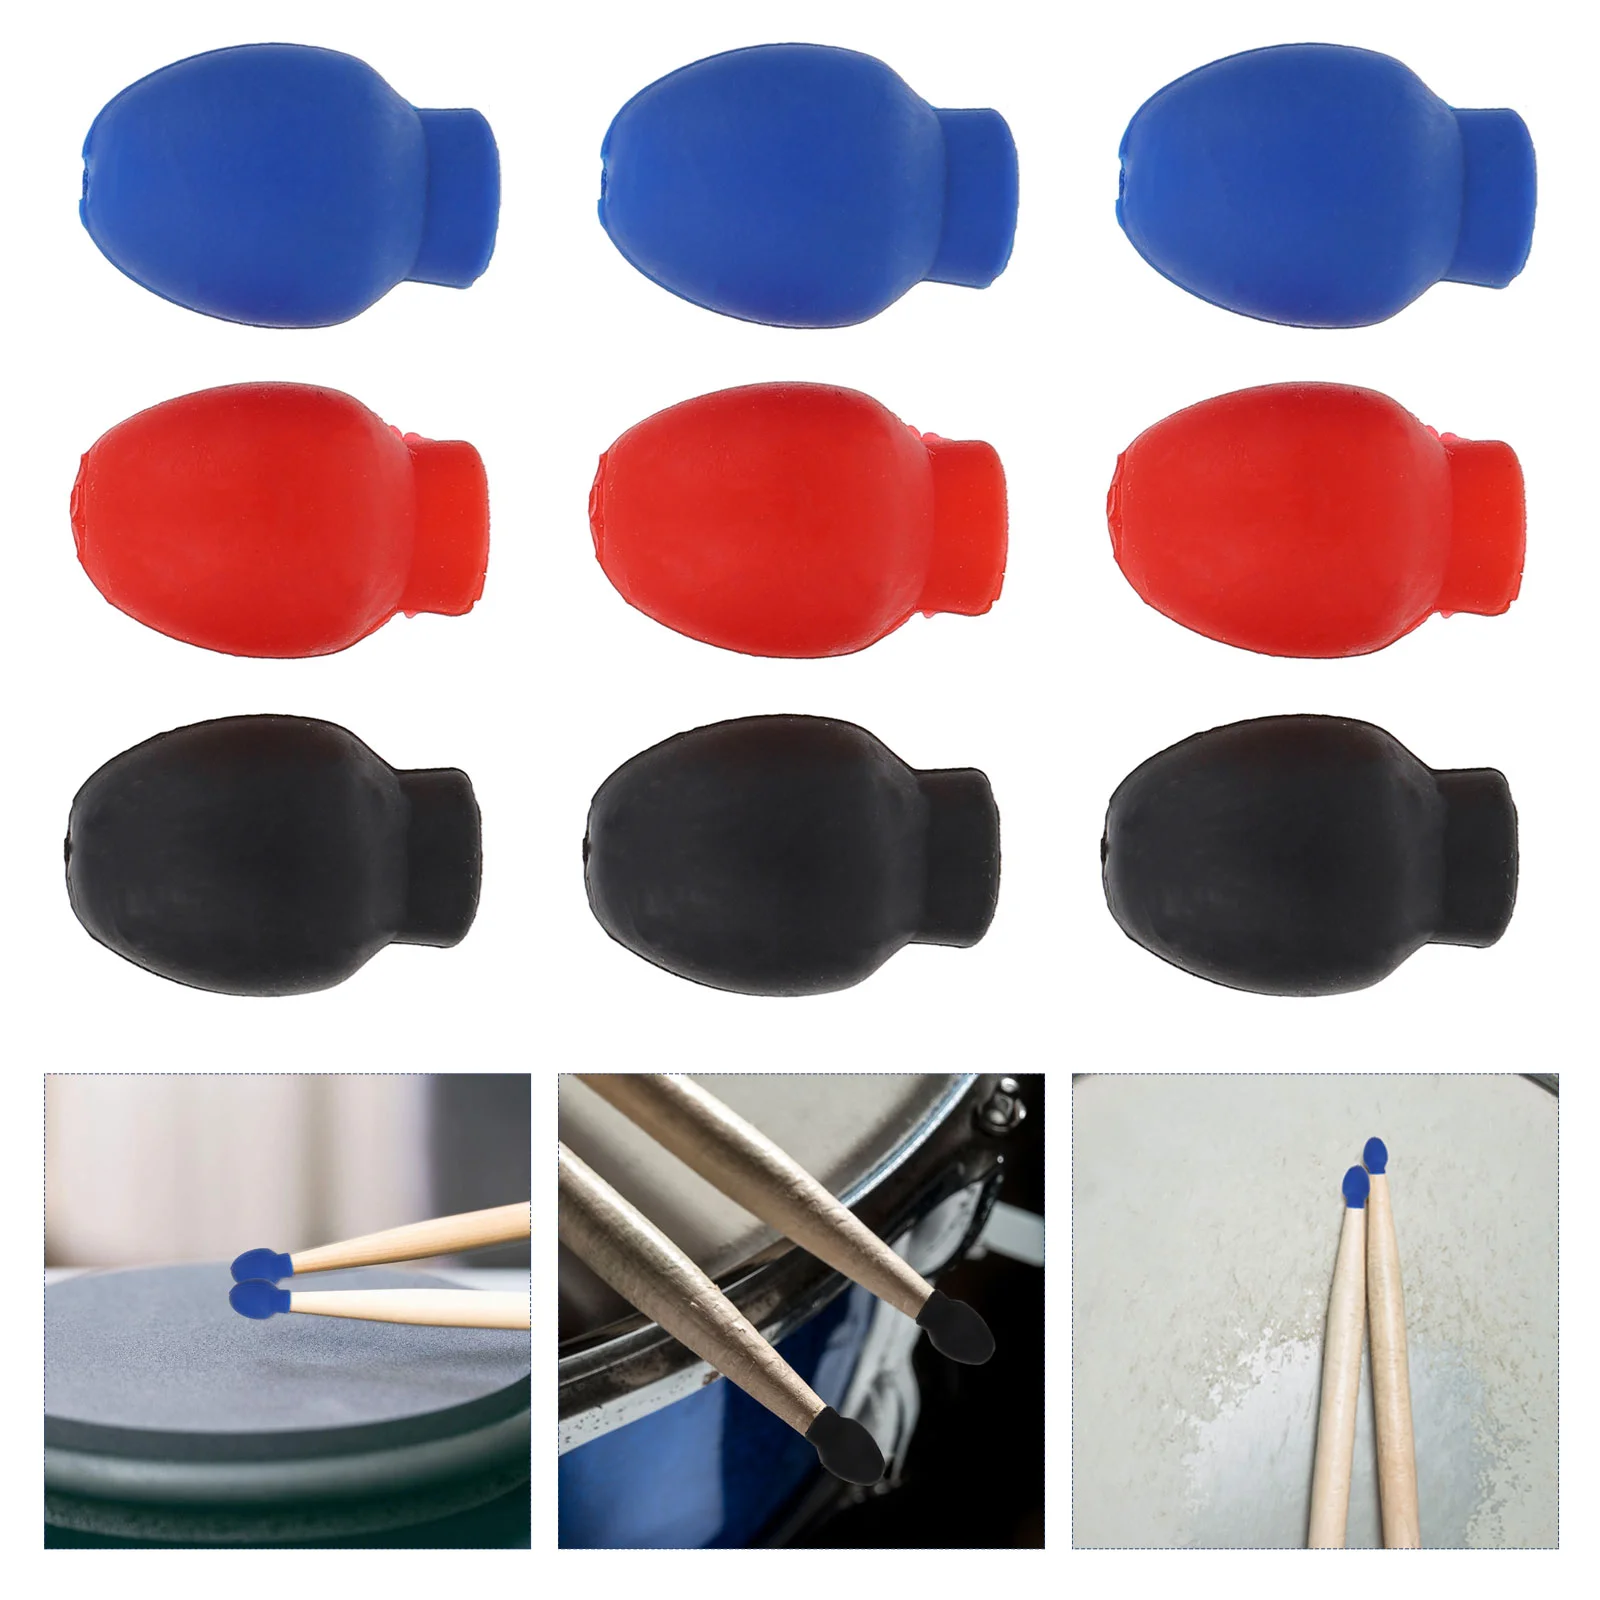 

6 Pairs of Drum Mute Drumstick Silent Tip Drum Dampener Rubber Practice Percussion Tips Mute Replacement Practice Tips for Drum